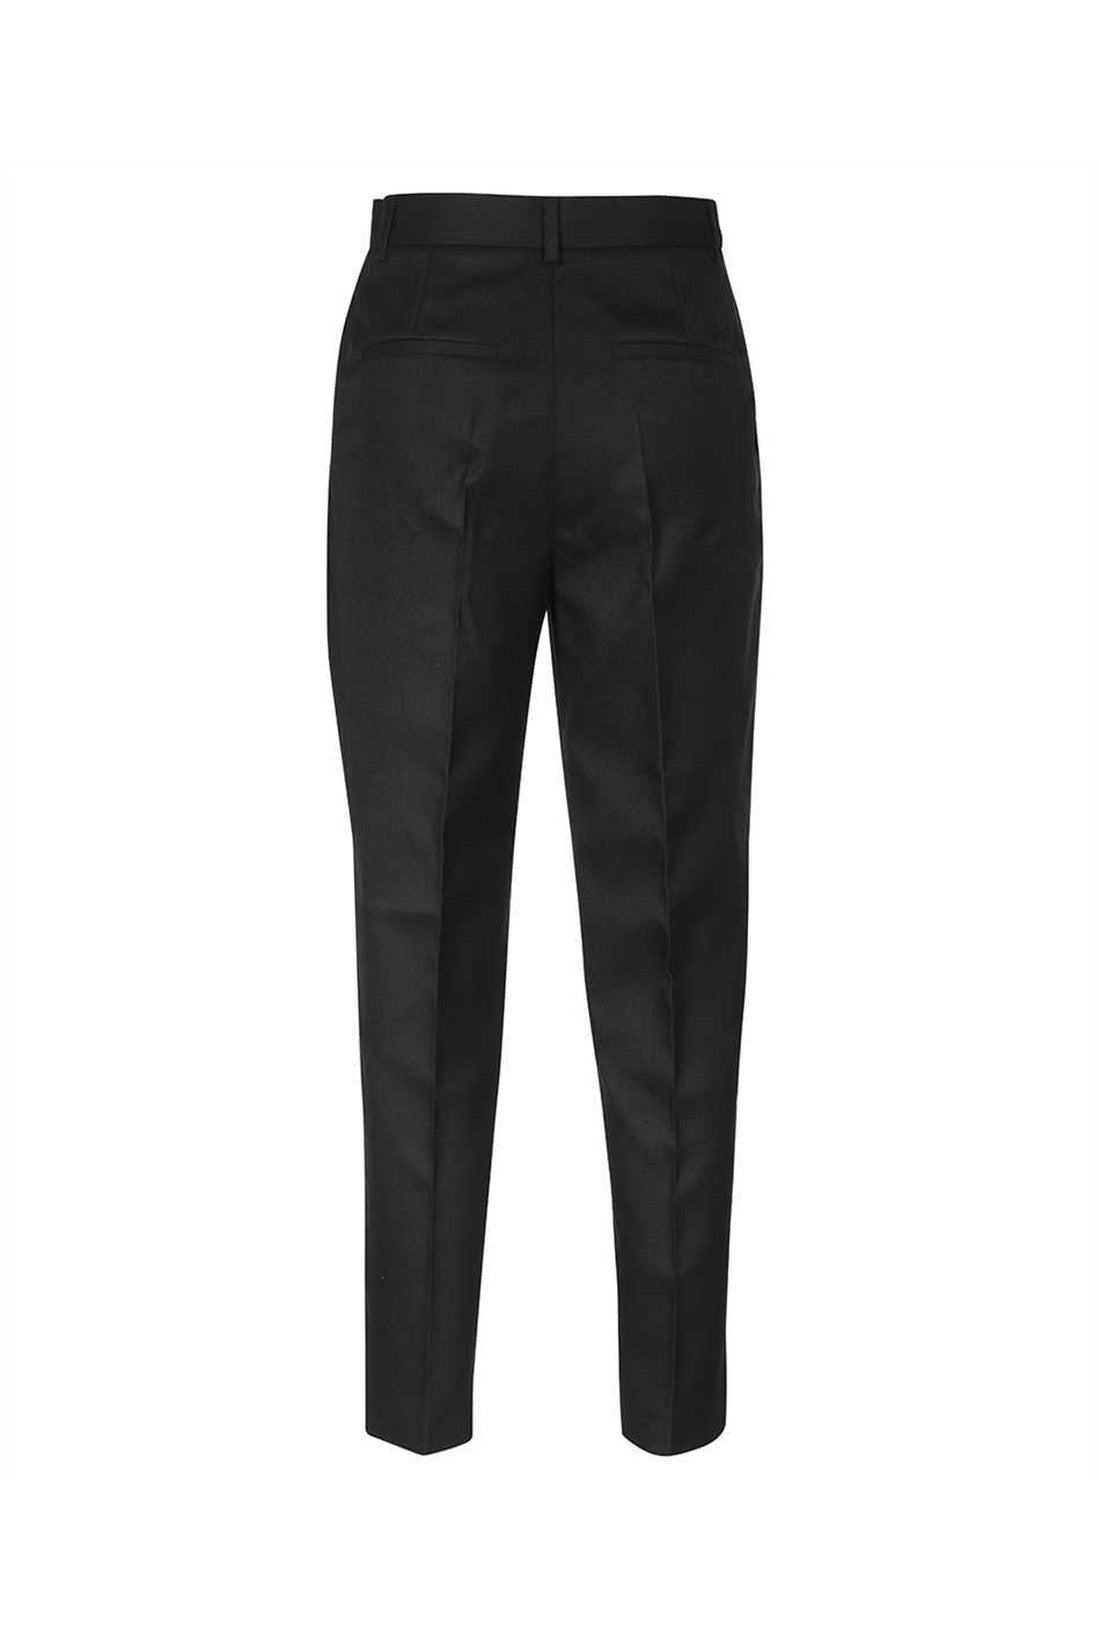 Straight-leg trousers-Karl Lagerfeld-OUTLET-SALE-ARCHIVIST